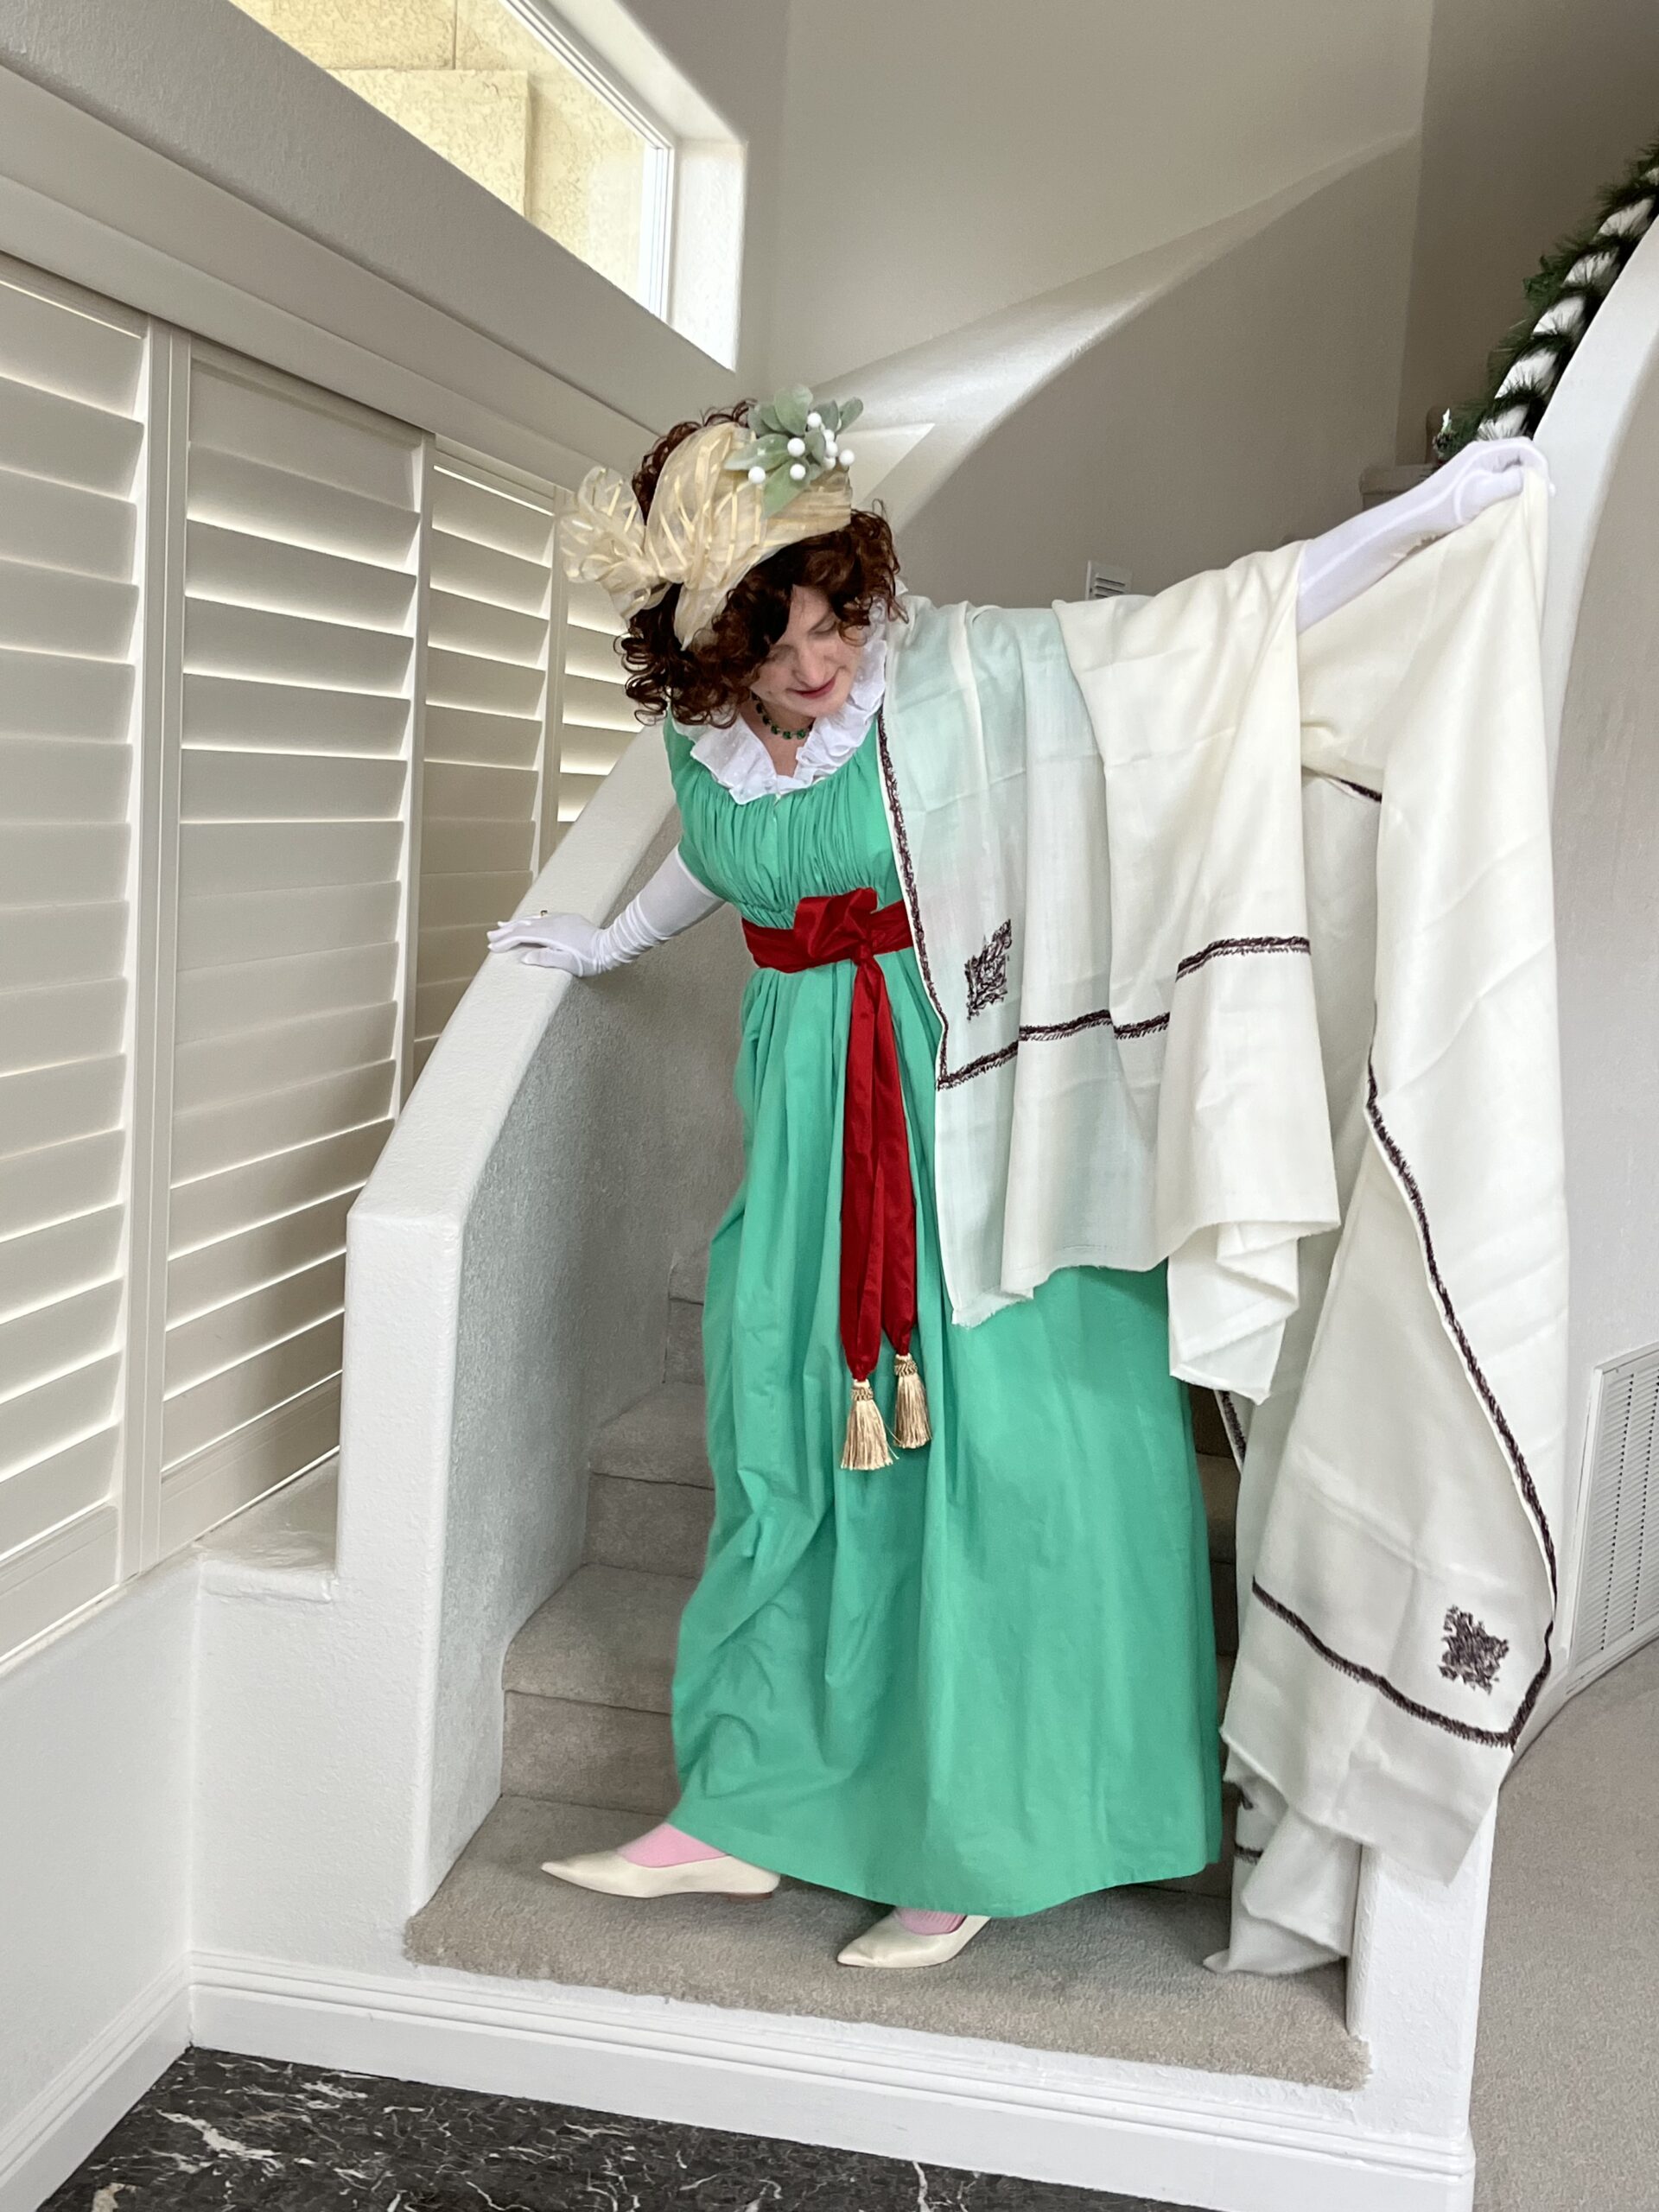 Tabubilgirl stands on a stair wearing a green 1790s round gown. A large cream shawl is draped over her arm